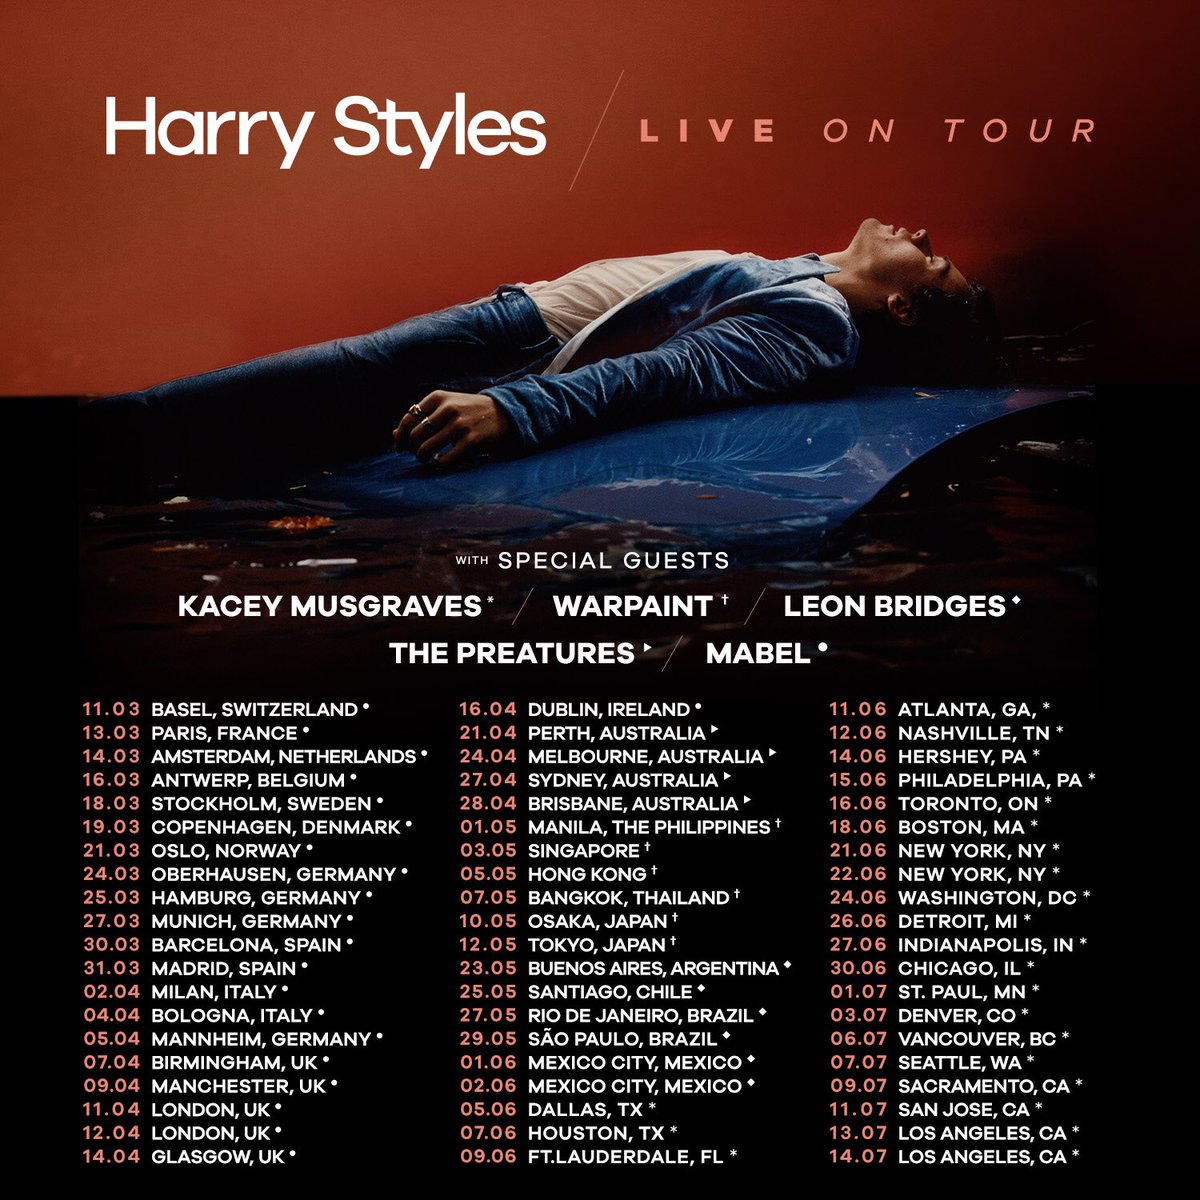 harry styles extended tour